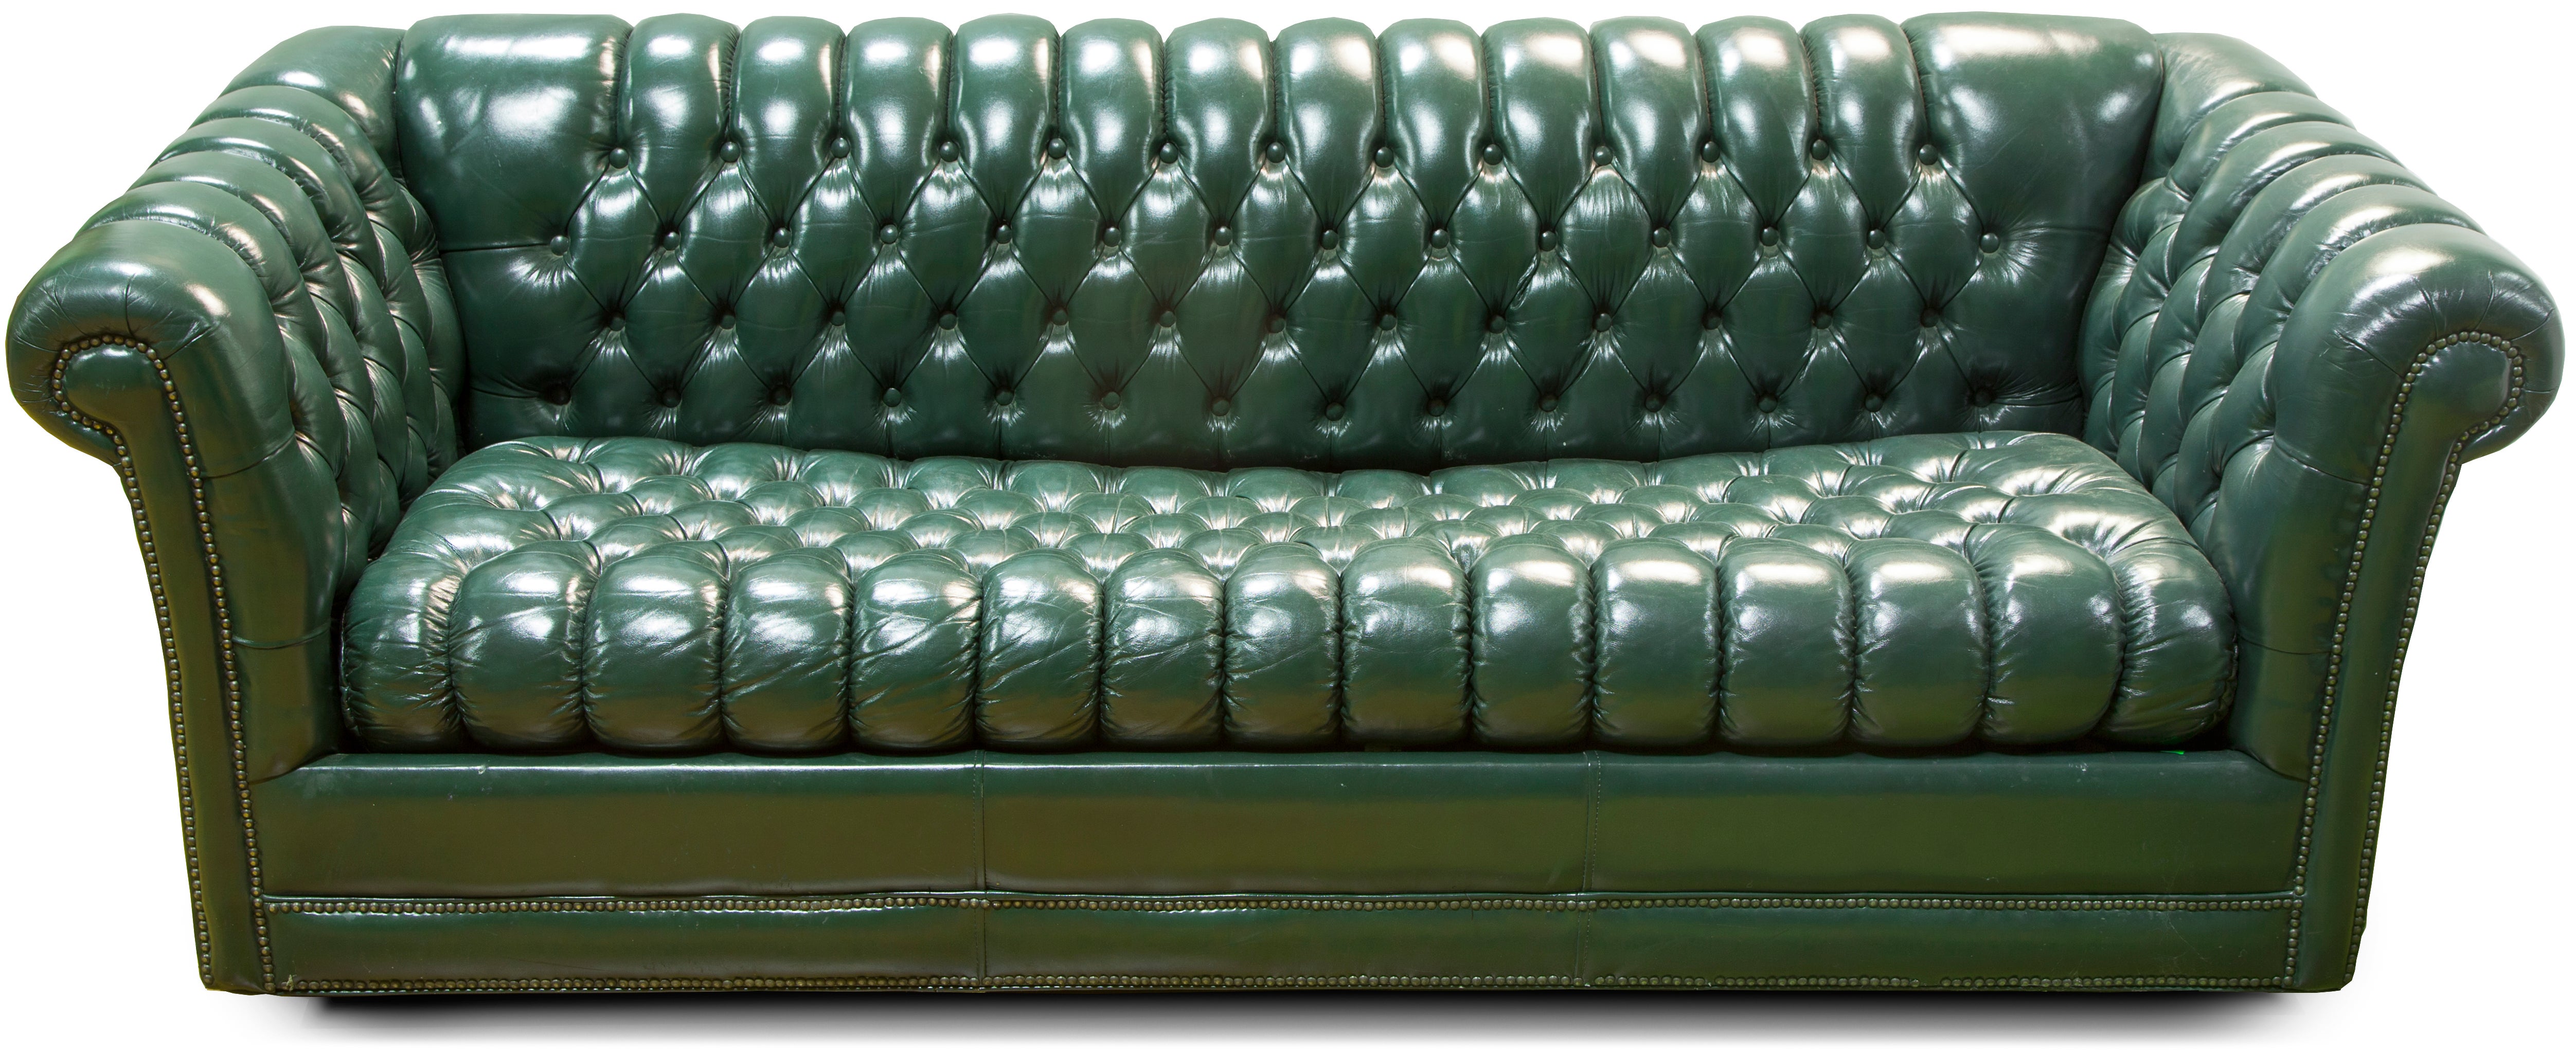 Green Leather Chesterfield Sofa At 1stdibs, Green Leather Chesterfield